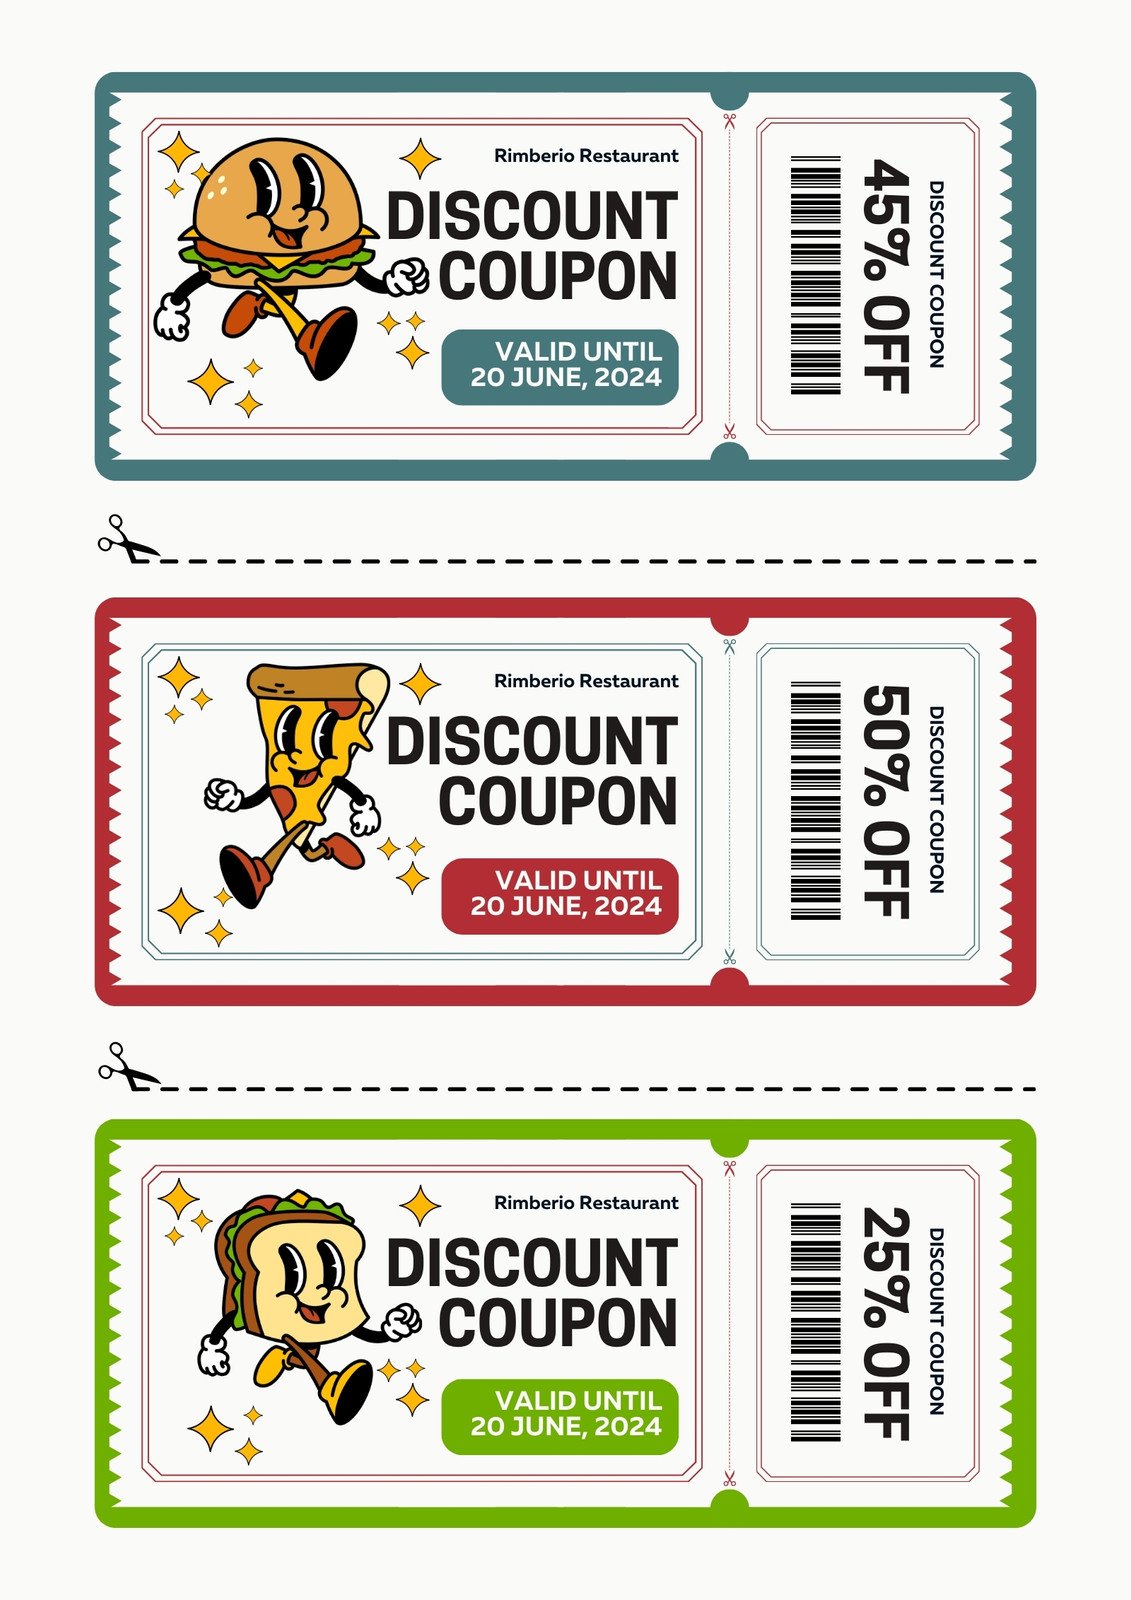 Discounted restaurant coupons